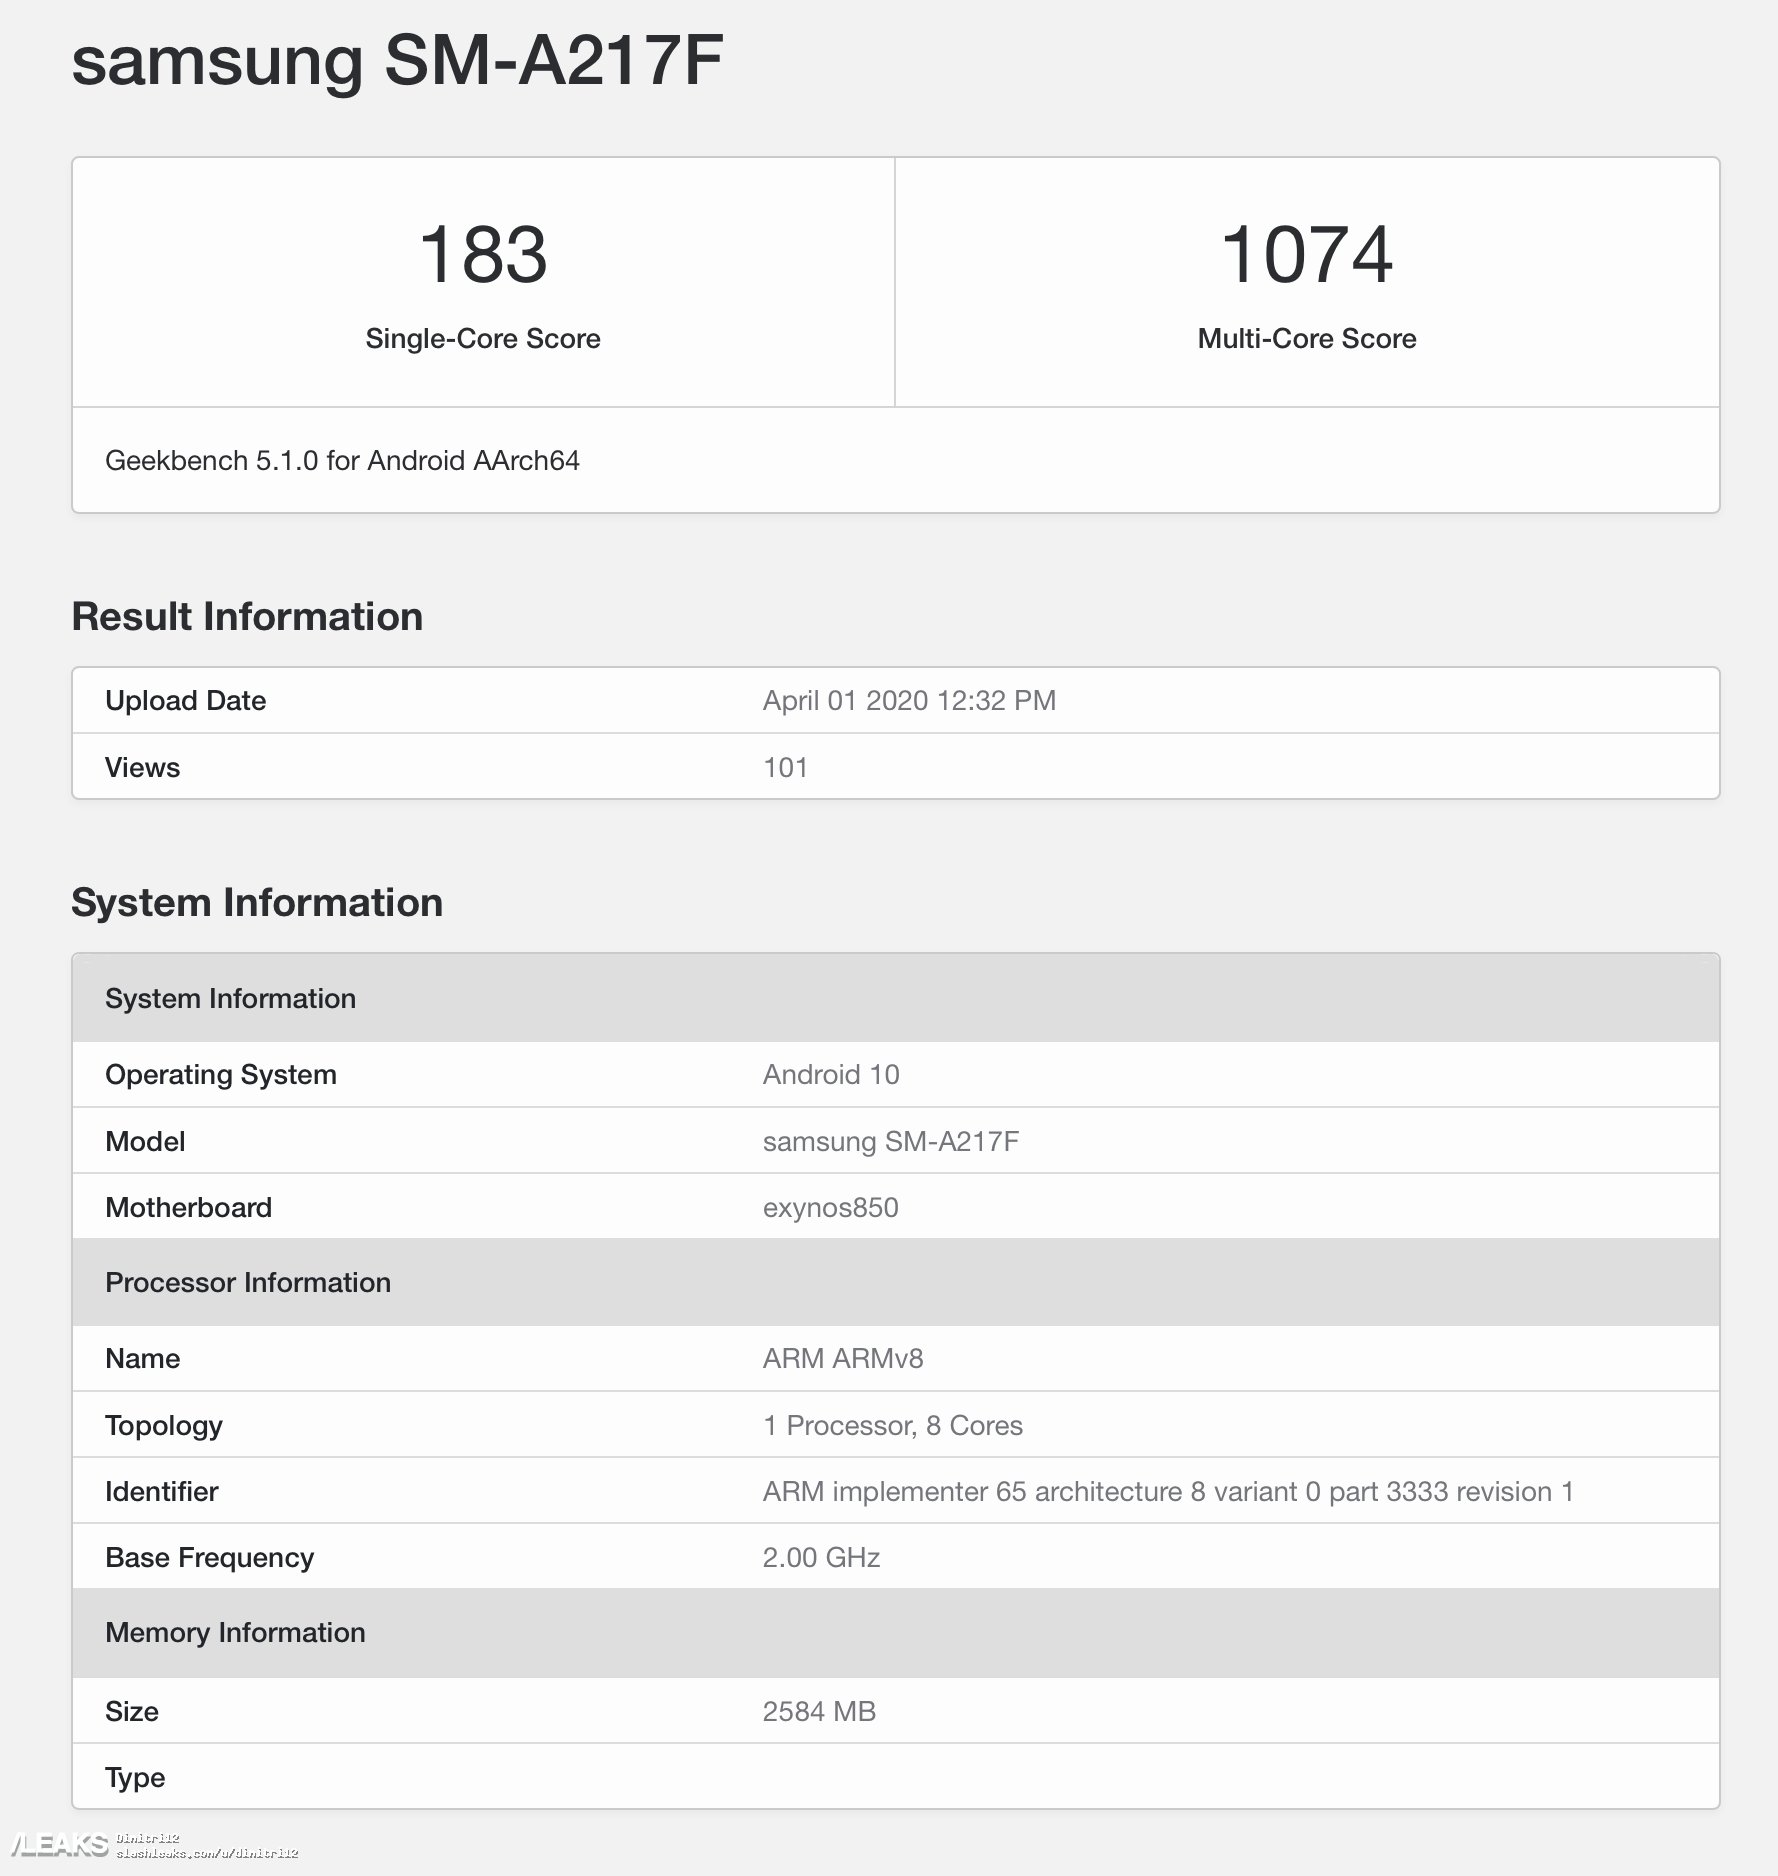 LEAKS on Twitter: "#Samsung - #GalaxyA21s - Galaxy A21s with 850 and 3GB RAM https://t.co/DhOxVP4H8Z https://t.co/VNaUxnna8J" / Twitter